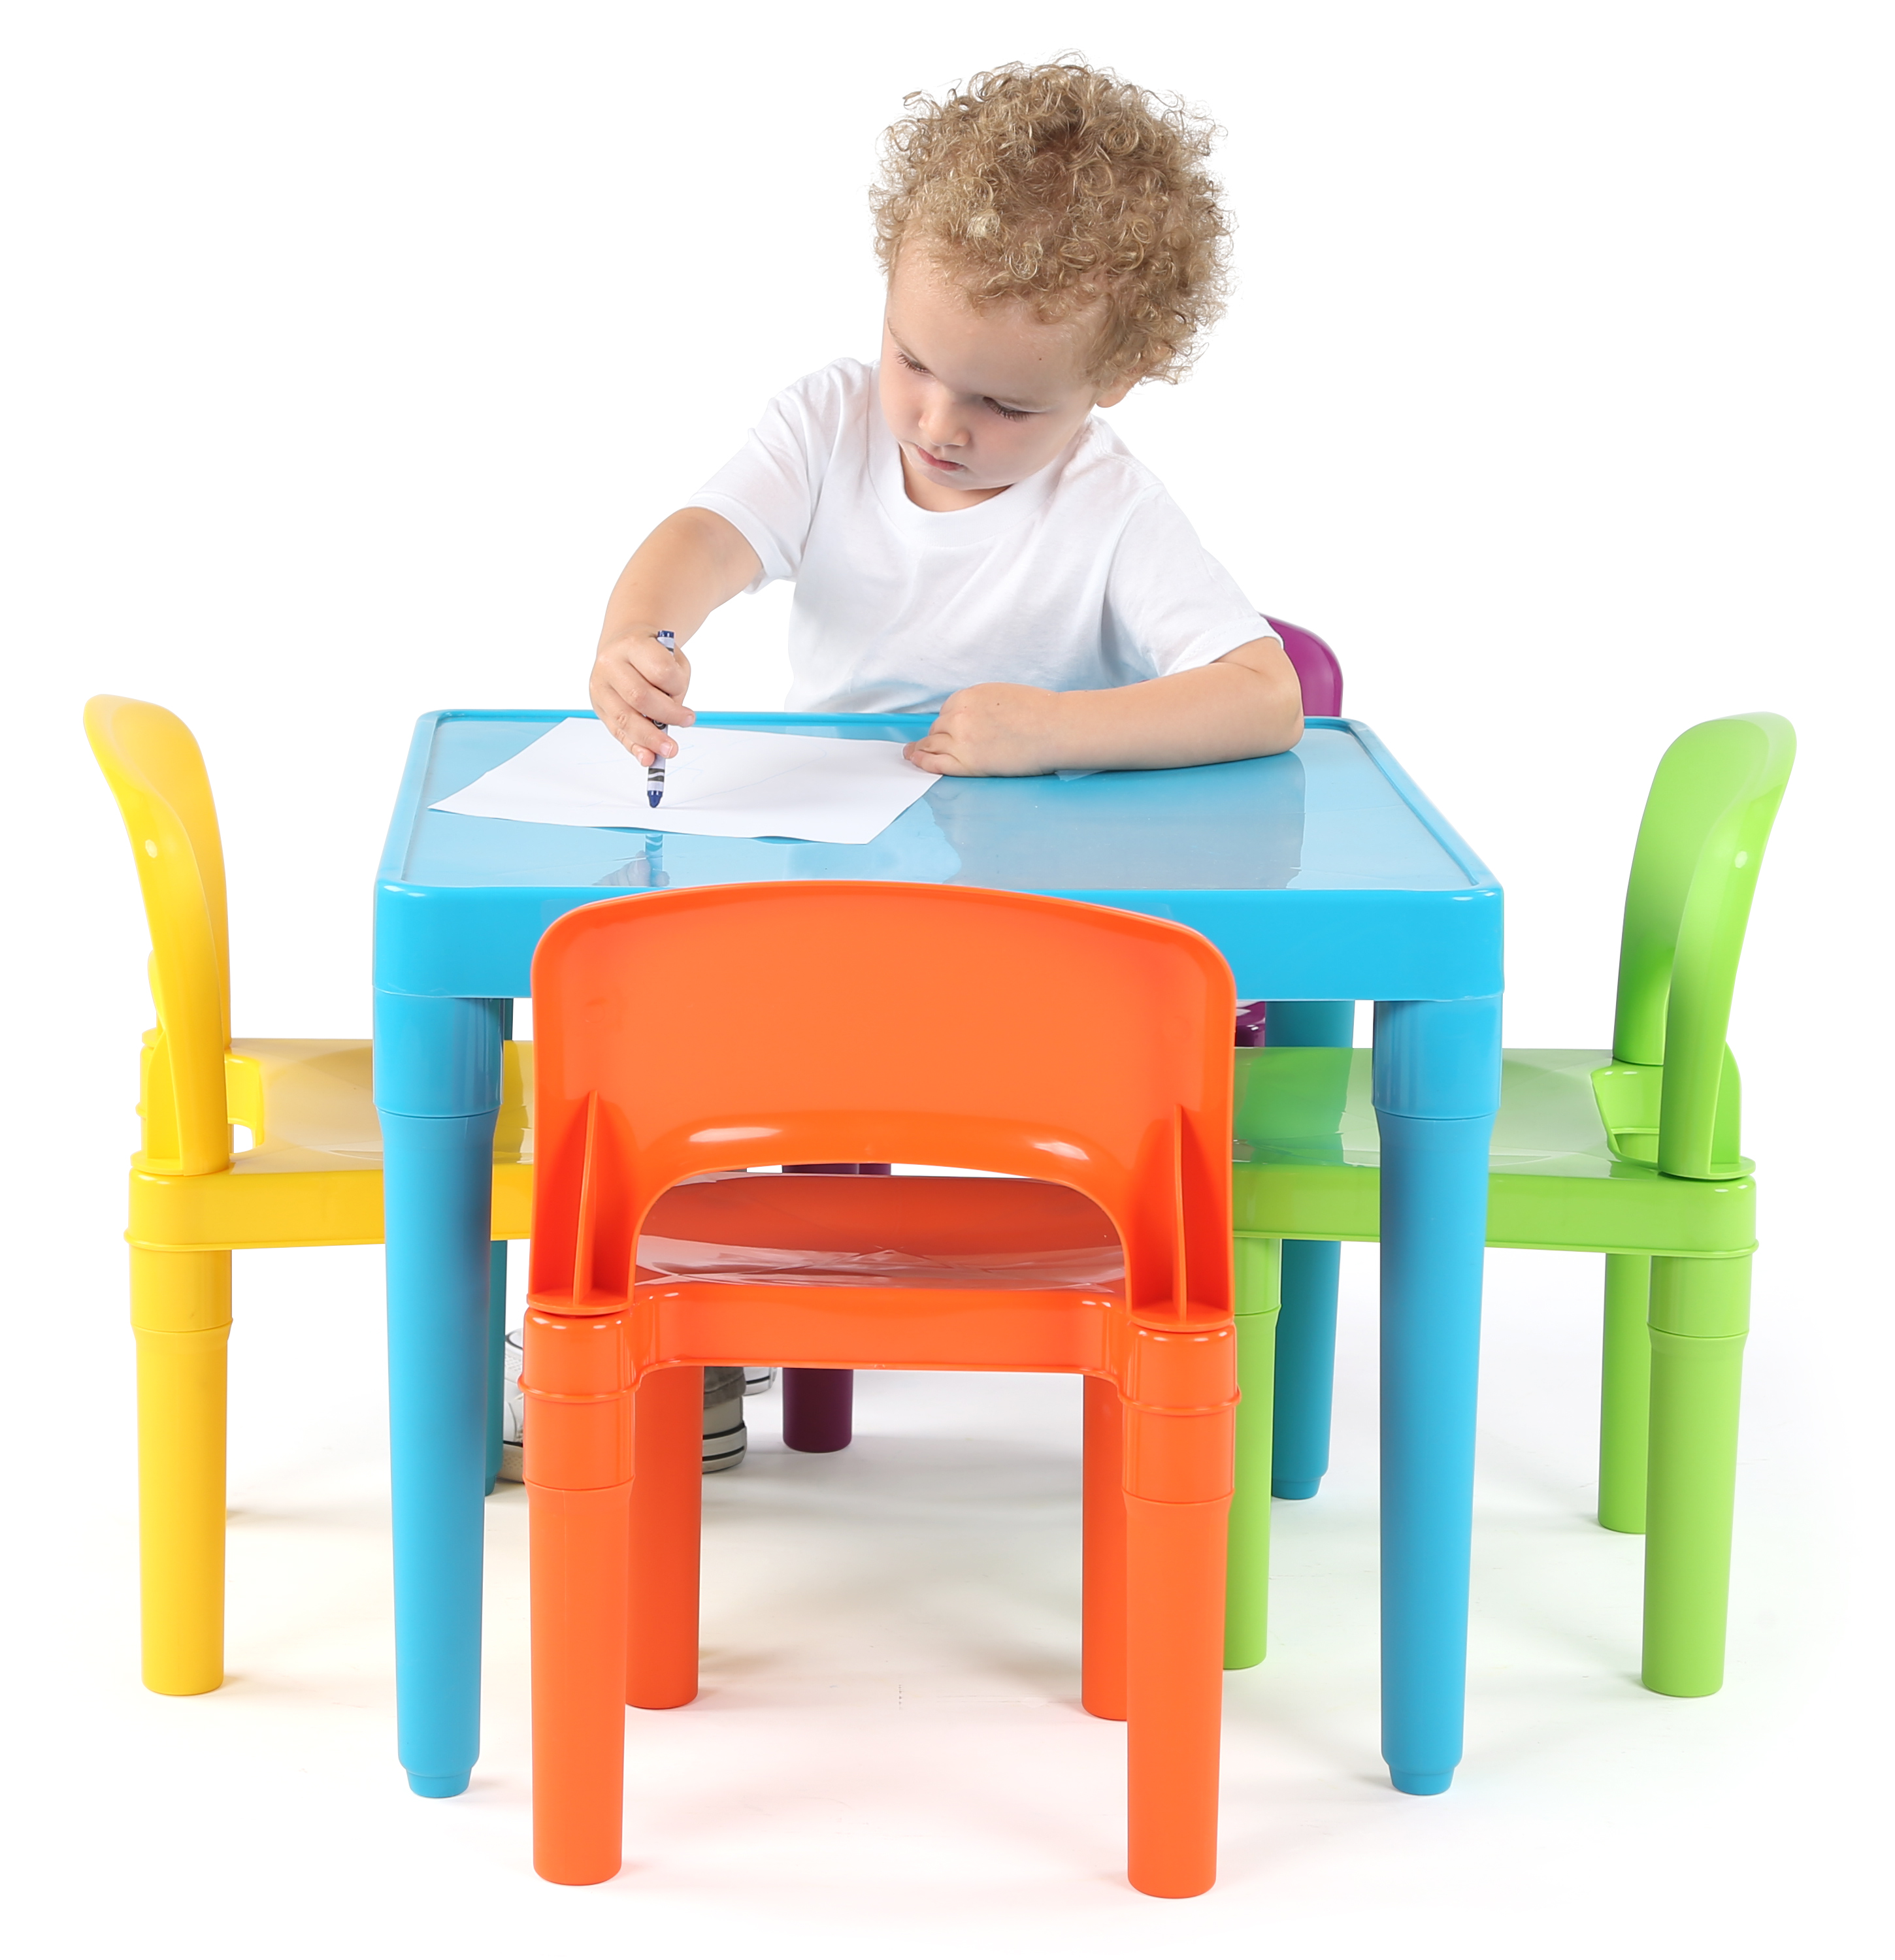 Humble Crew Kids Lightweight Plastic Table and 4 Chairs Set, Square, Blue/Orange/Green/Yellow/Purple - image 4 of 6